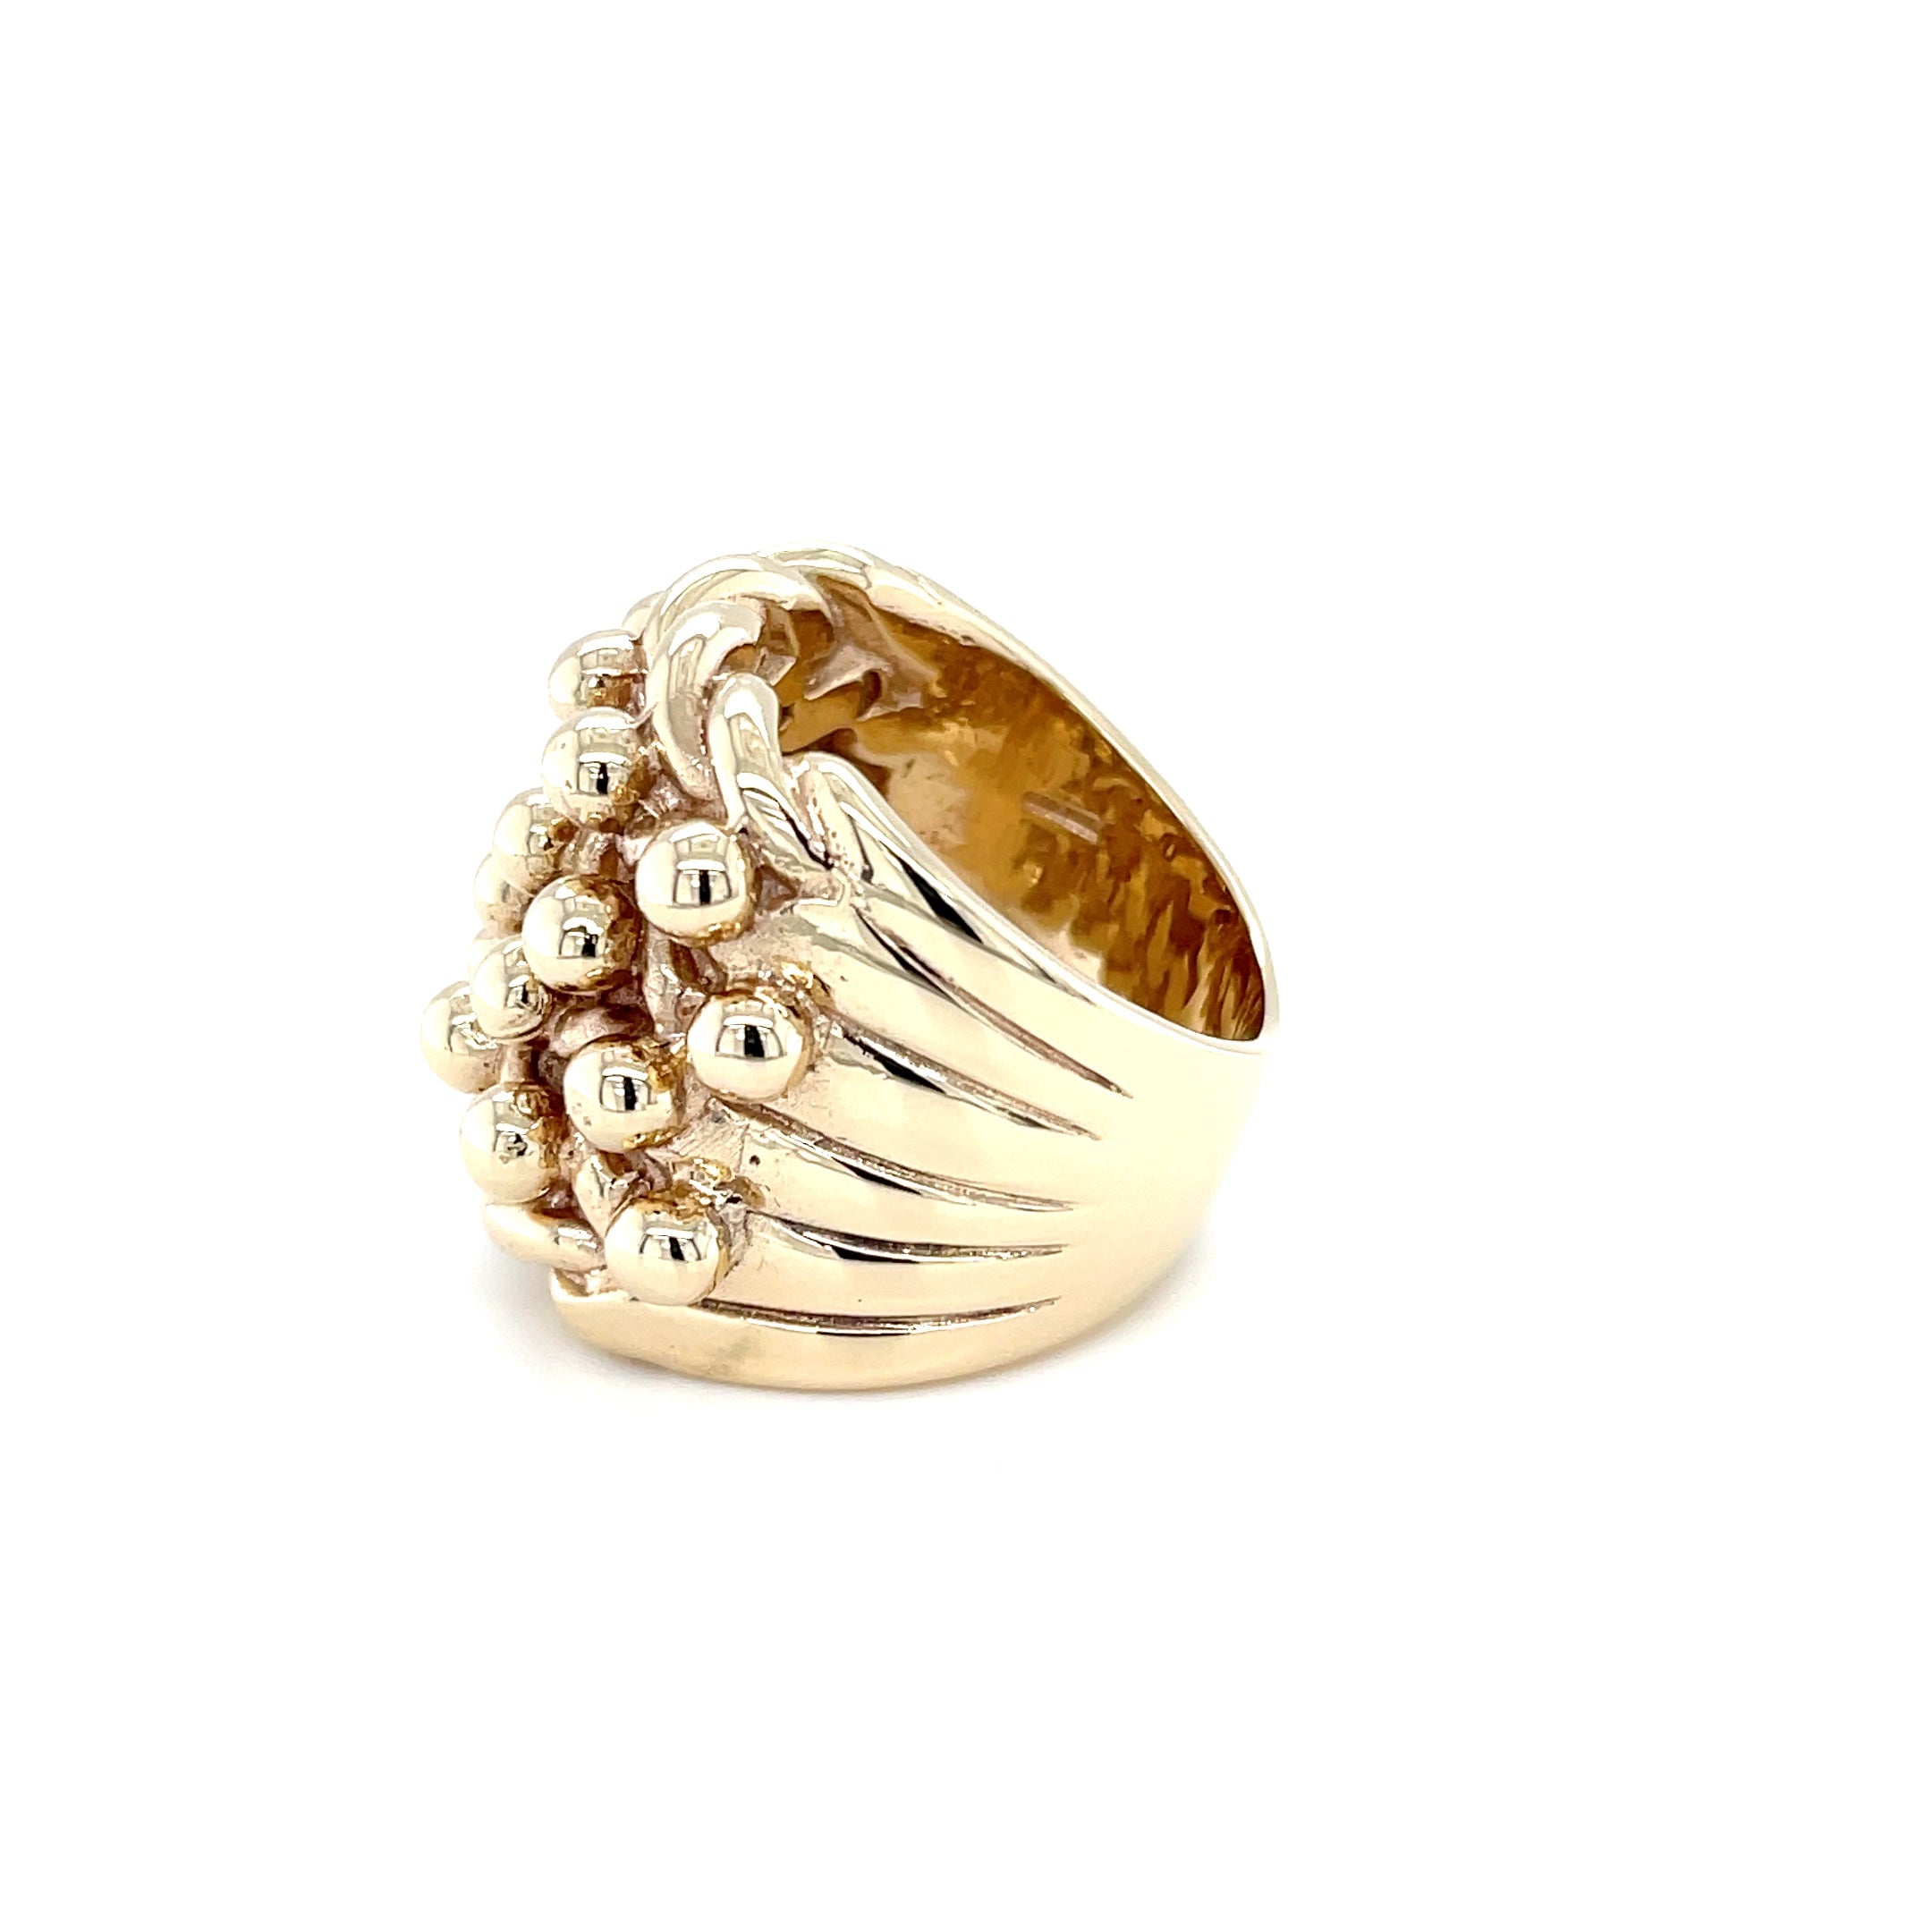 9ct Yellow Gold 4 Row Heavy Keeper Ring Size Z - 46.50g SOLD